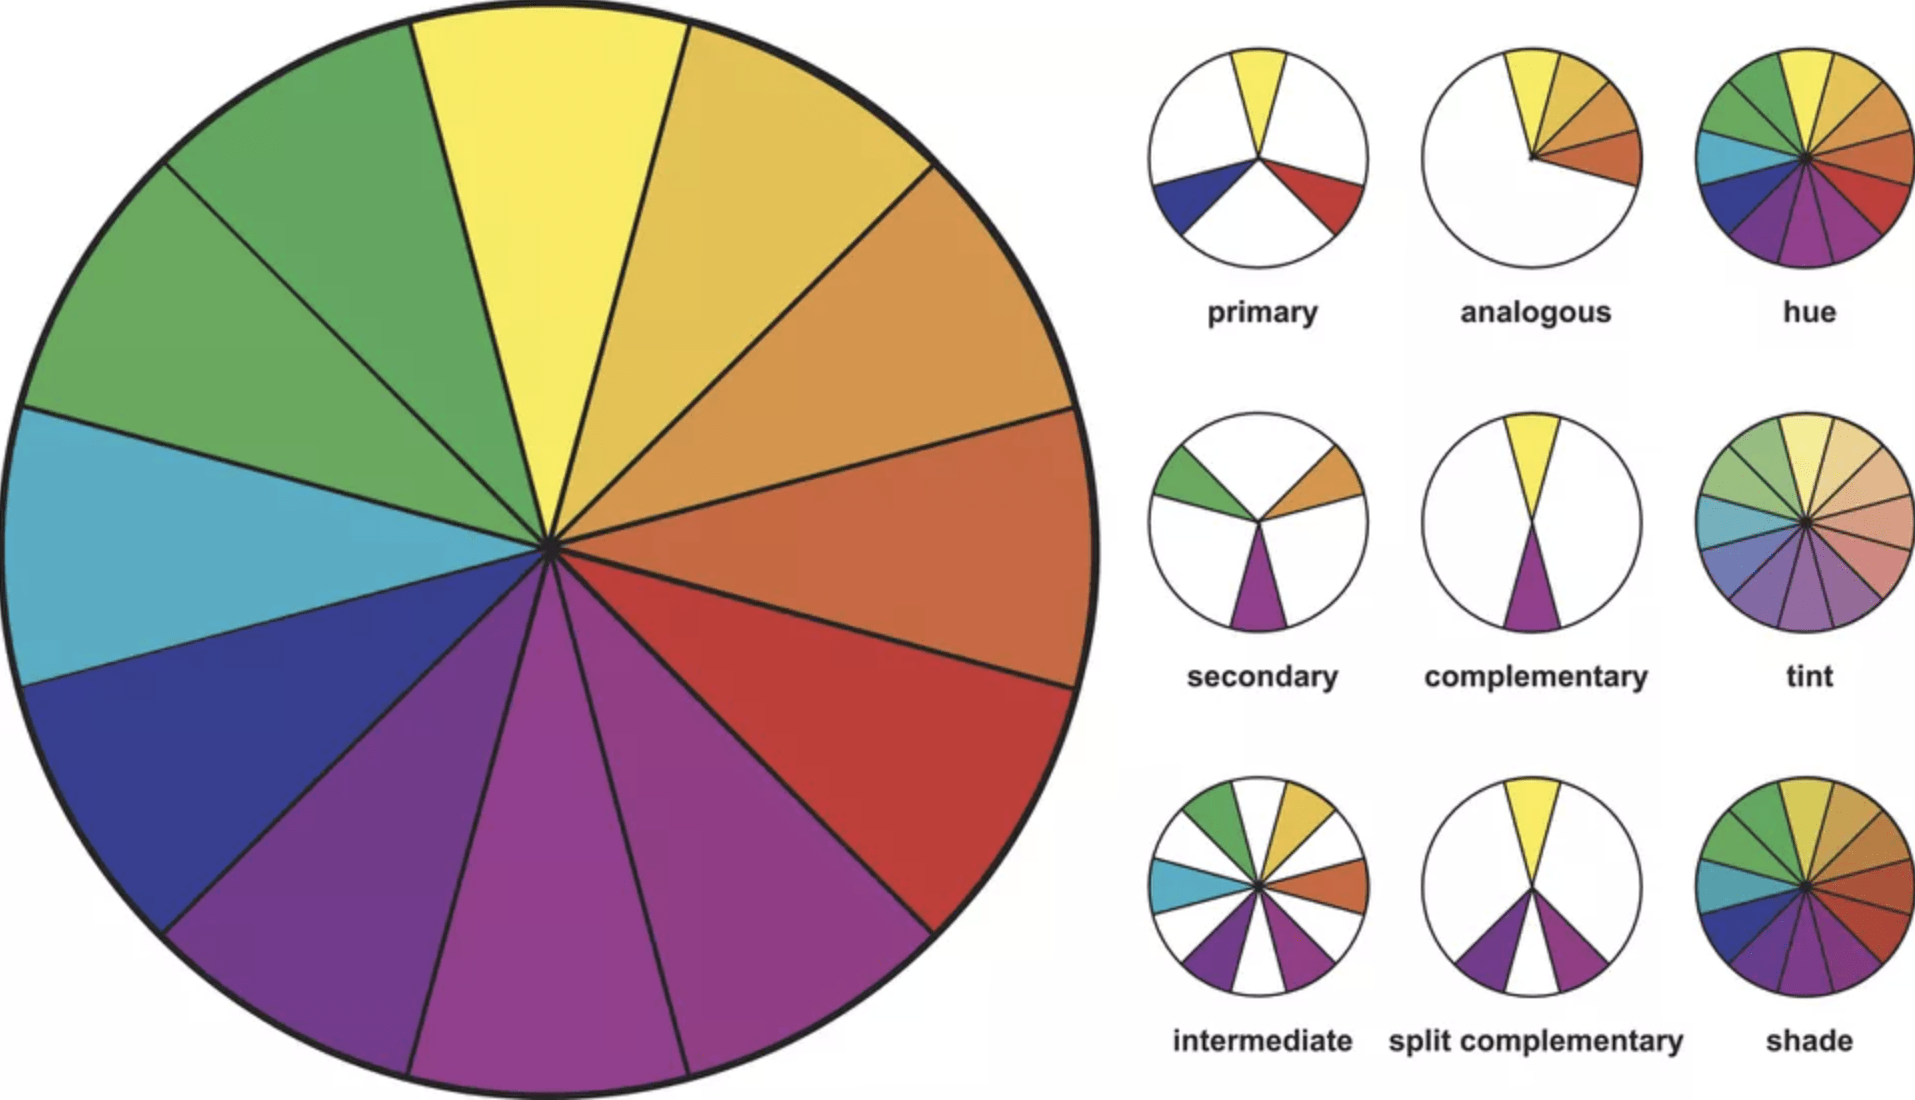 color wheel shows all different shades of color